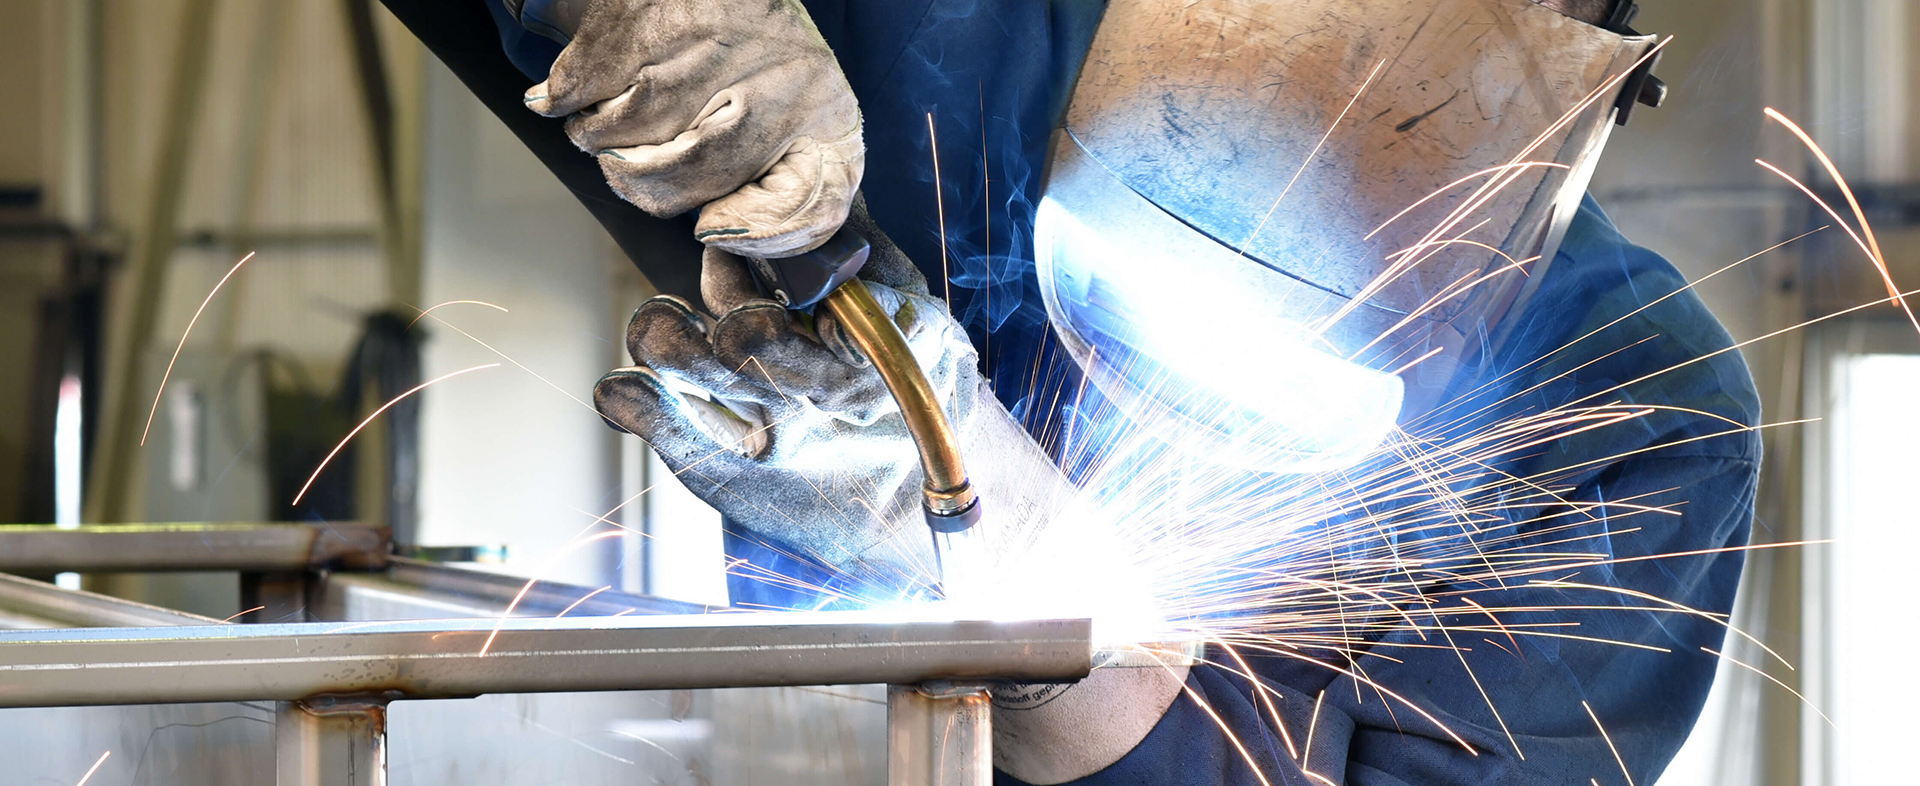 Close-up of a person welding, wearing gloves and other protective equipment 